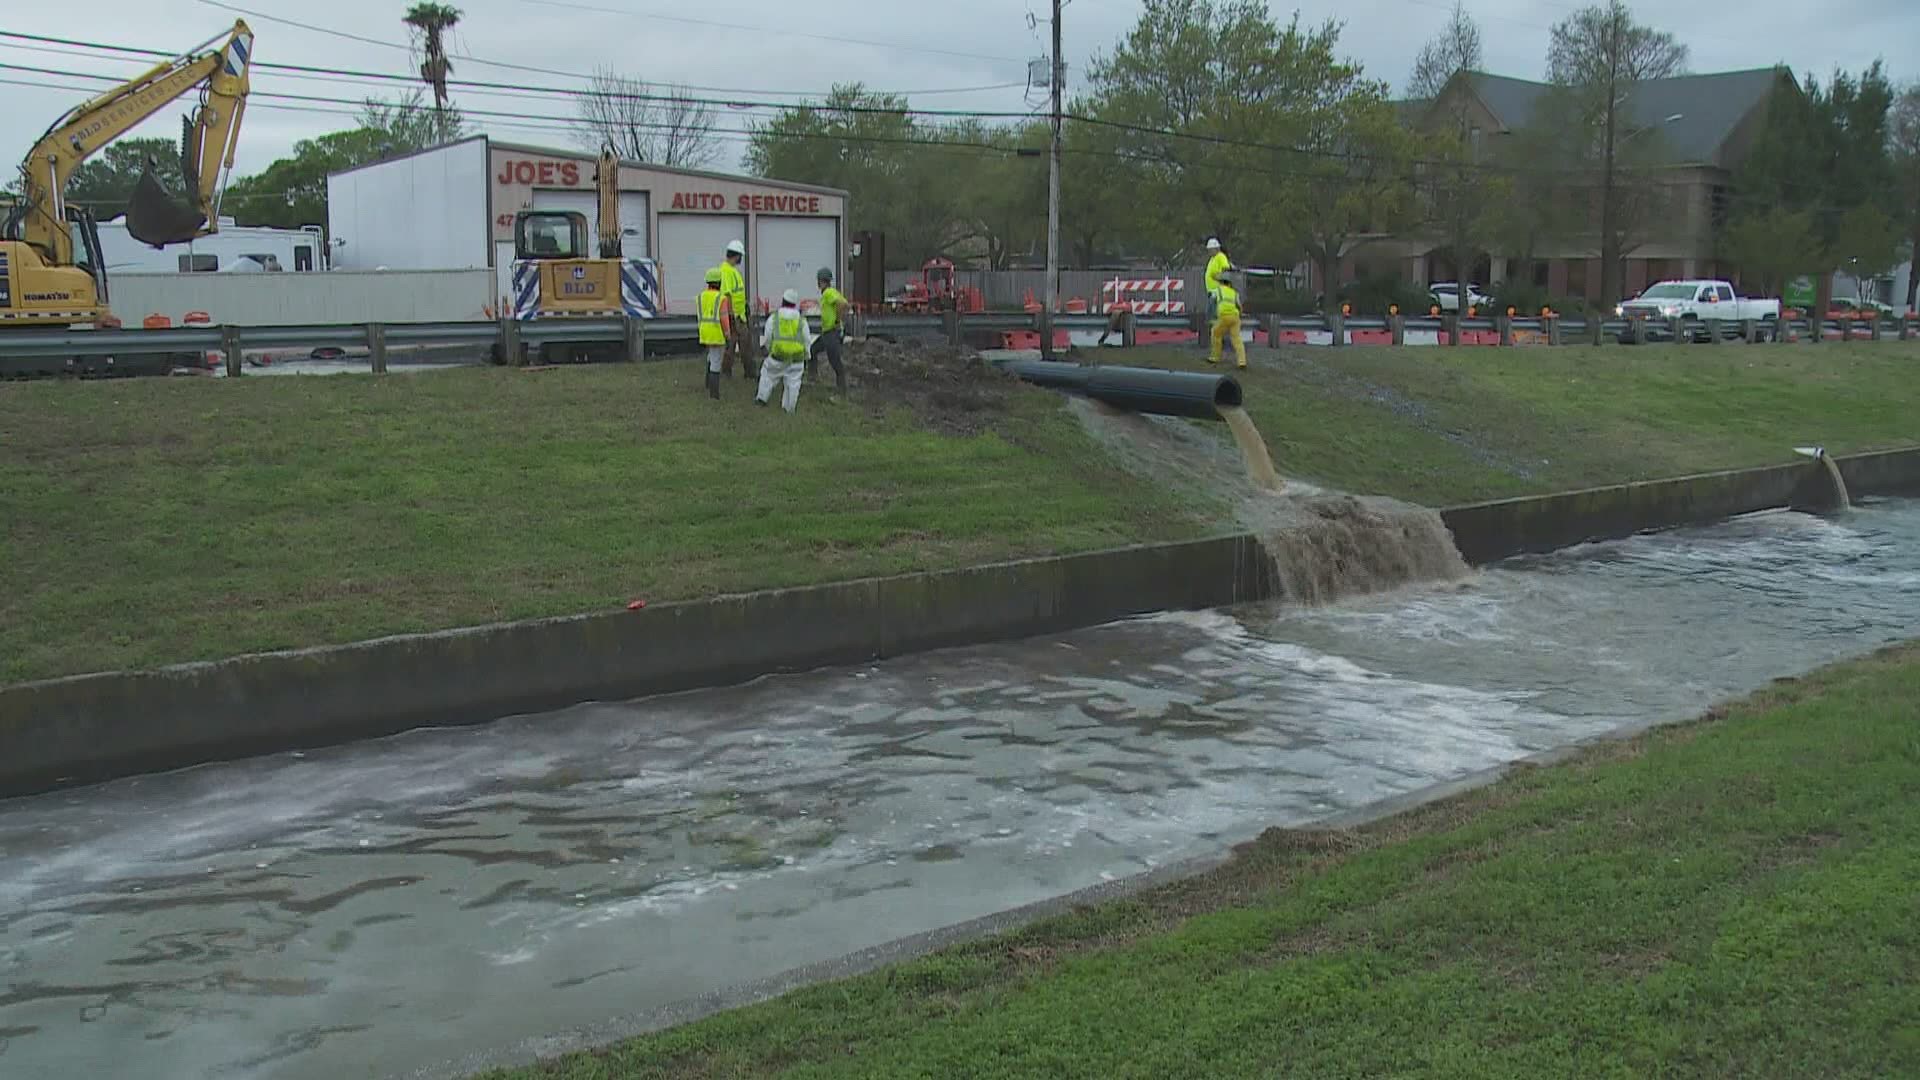 One business is suffering after a big water main break in a part of the road on West Napoleon in Metairie Wednesday.